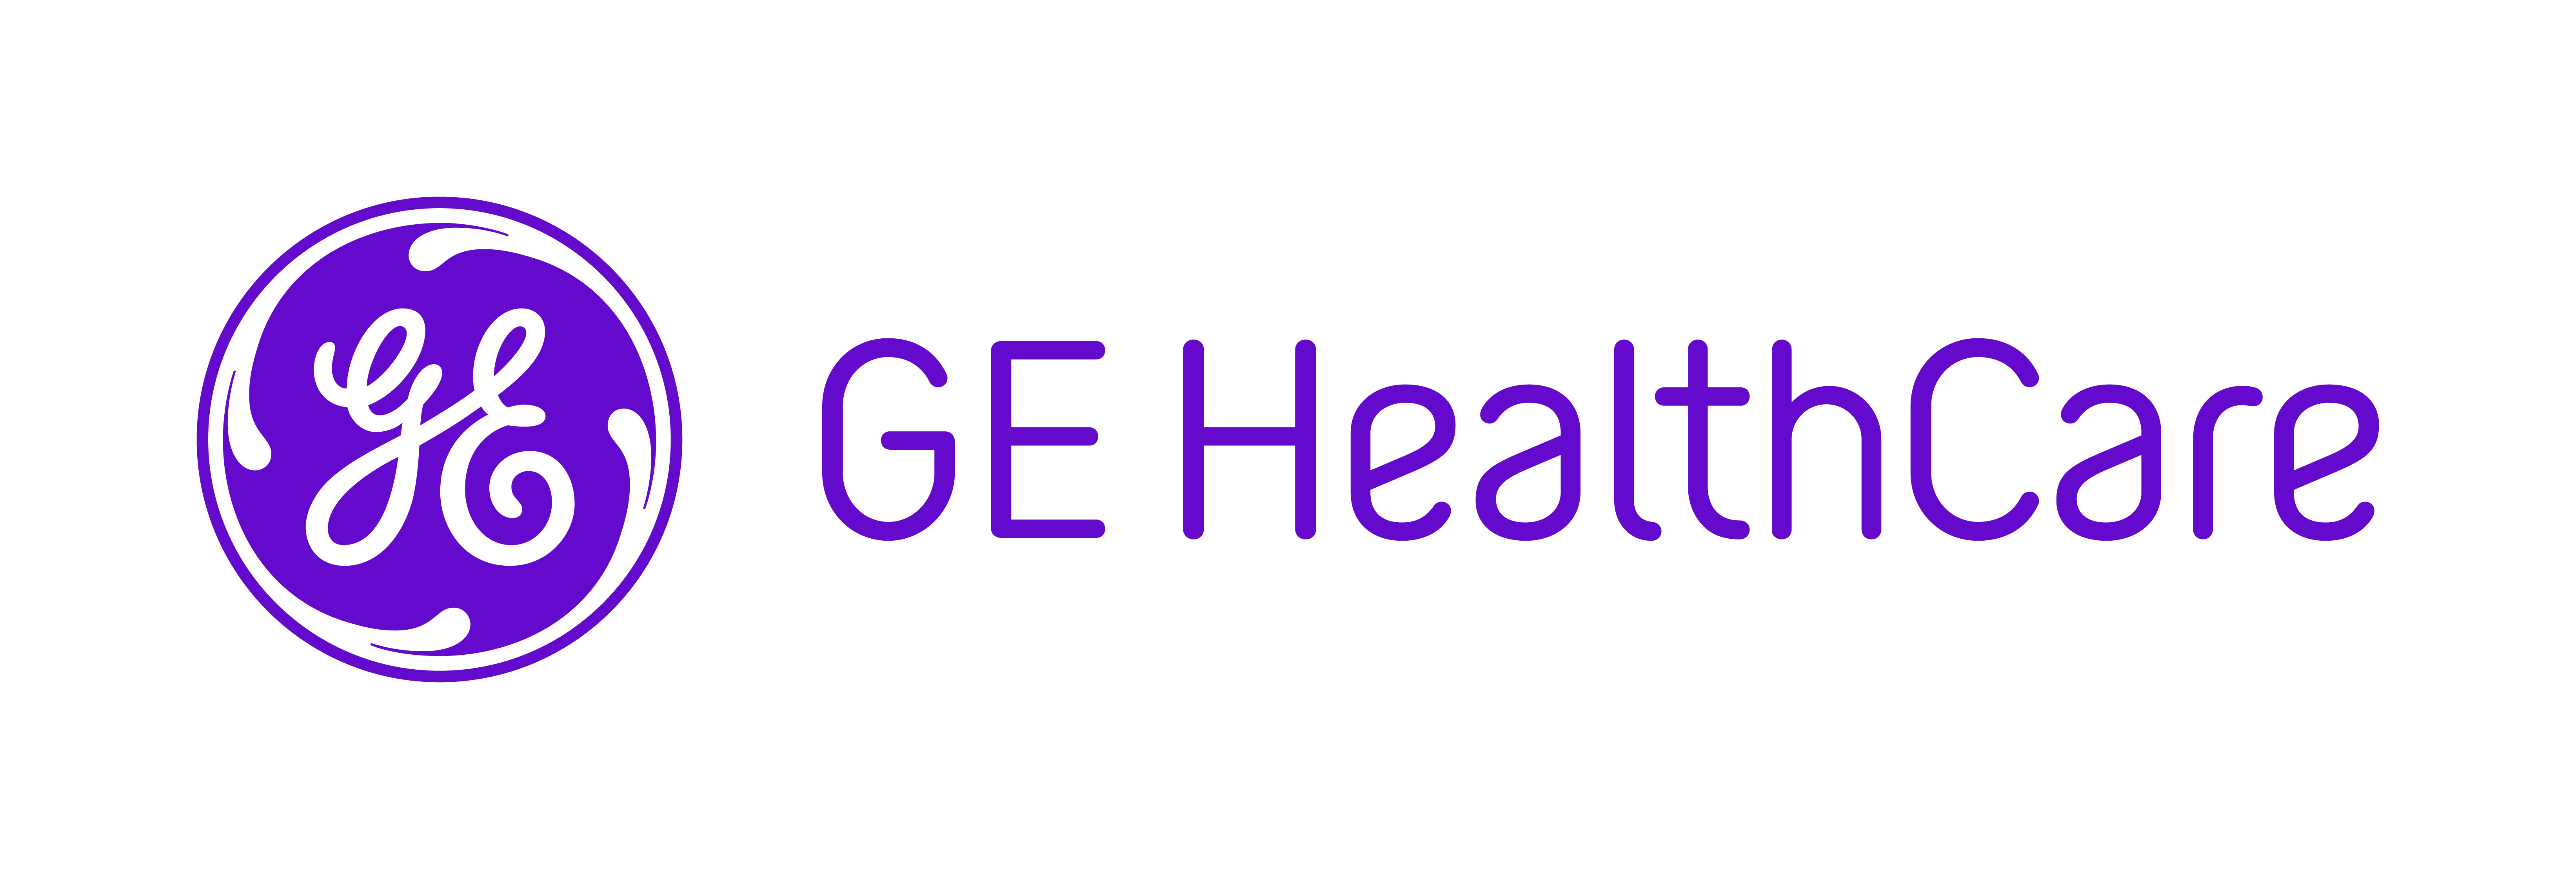 Ge healthcare time change cigna claim review form